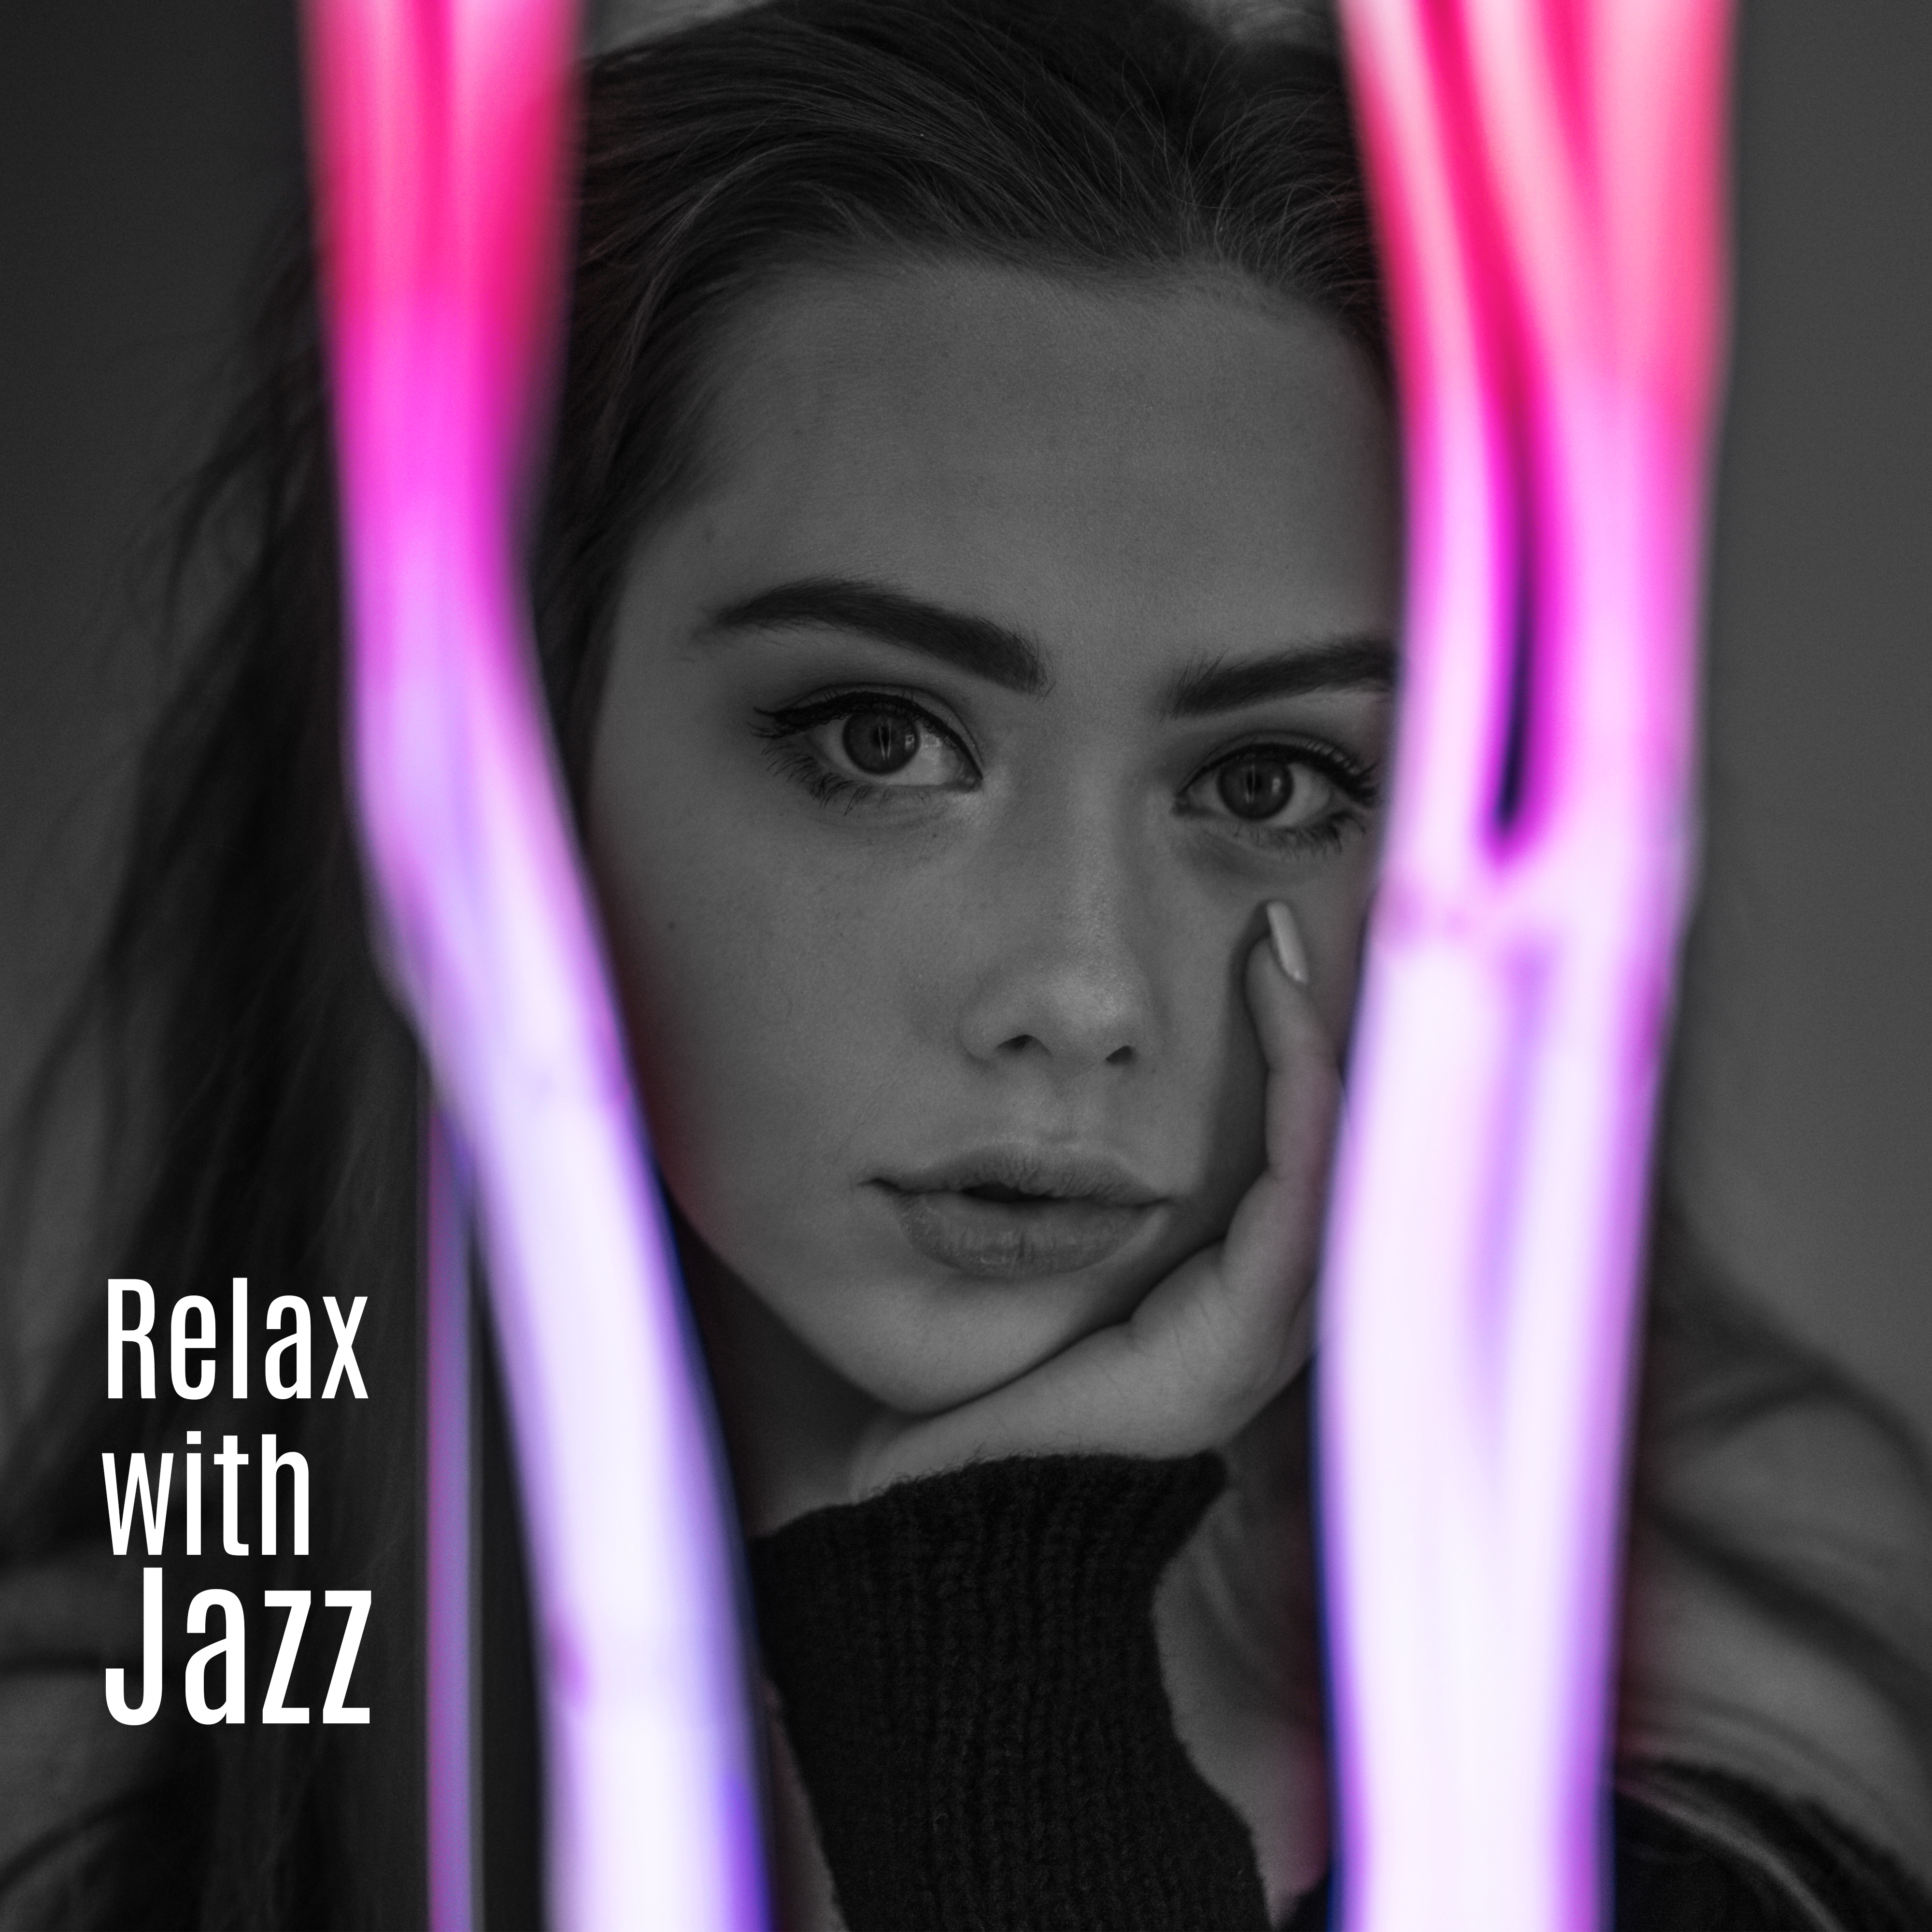 Relax with Jazz: Quiet and Relaxing Melodies when You Want to Relax and Unwind after a Day of Work or Duties